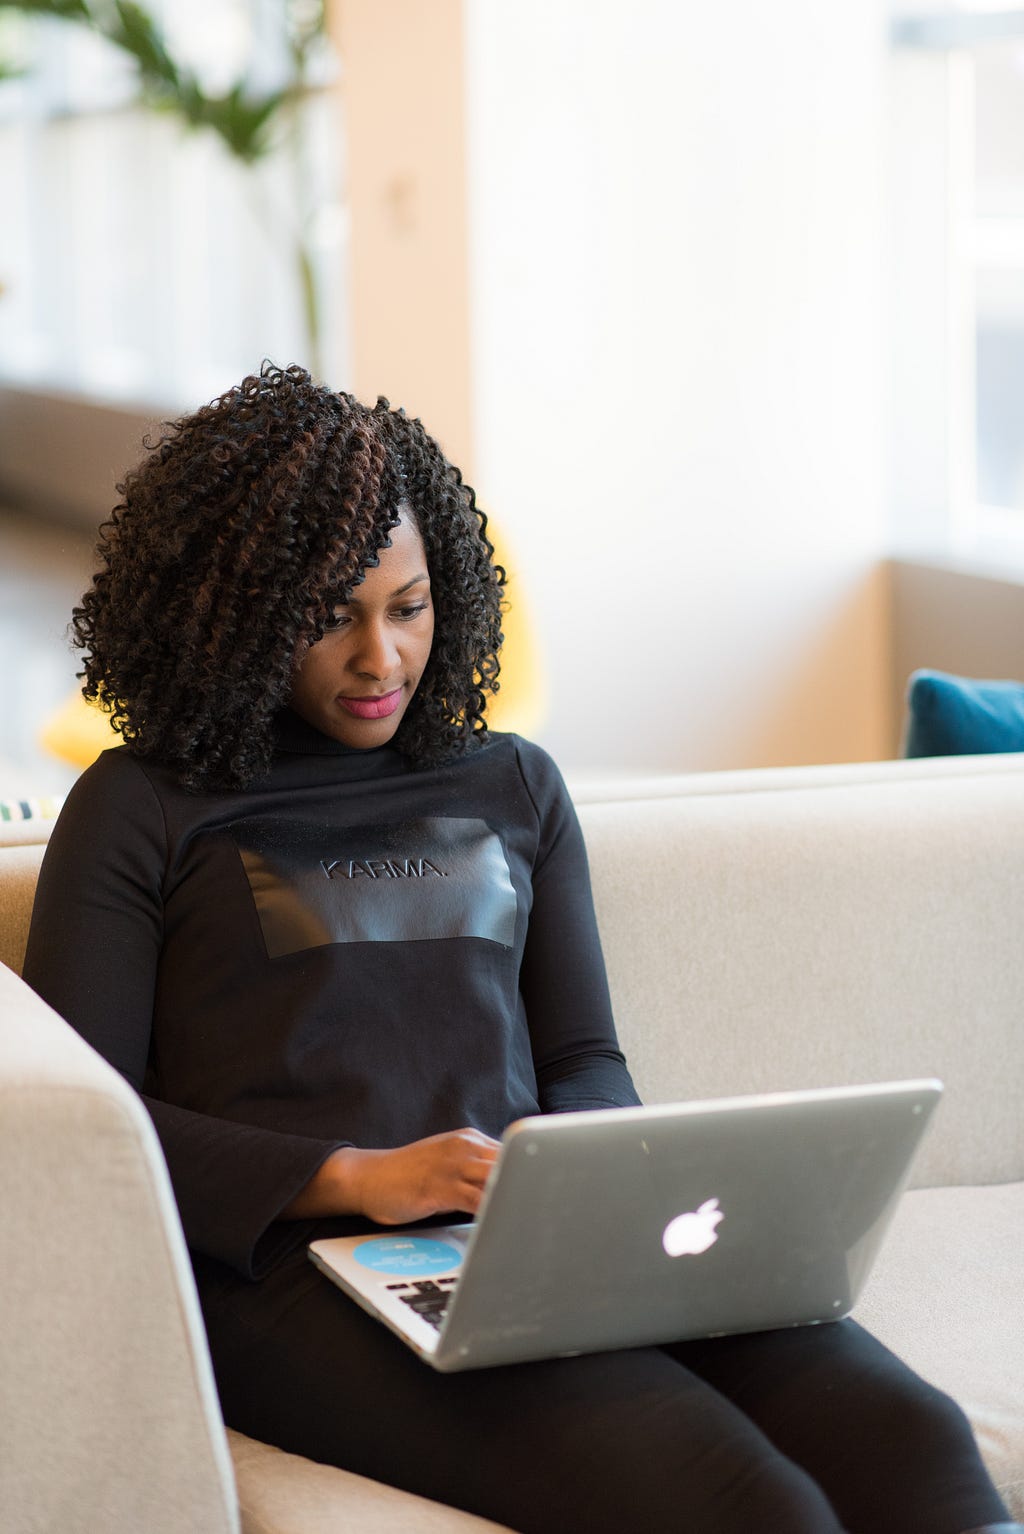 A black woman with curly dark hair wears a long-sleeved black shirt. She is typing on a gray laptop.